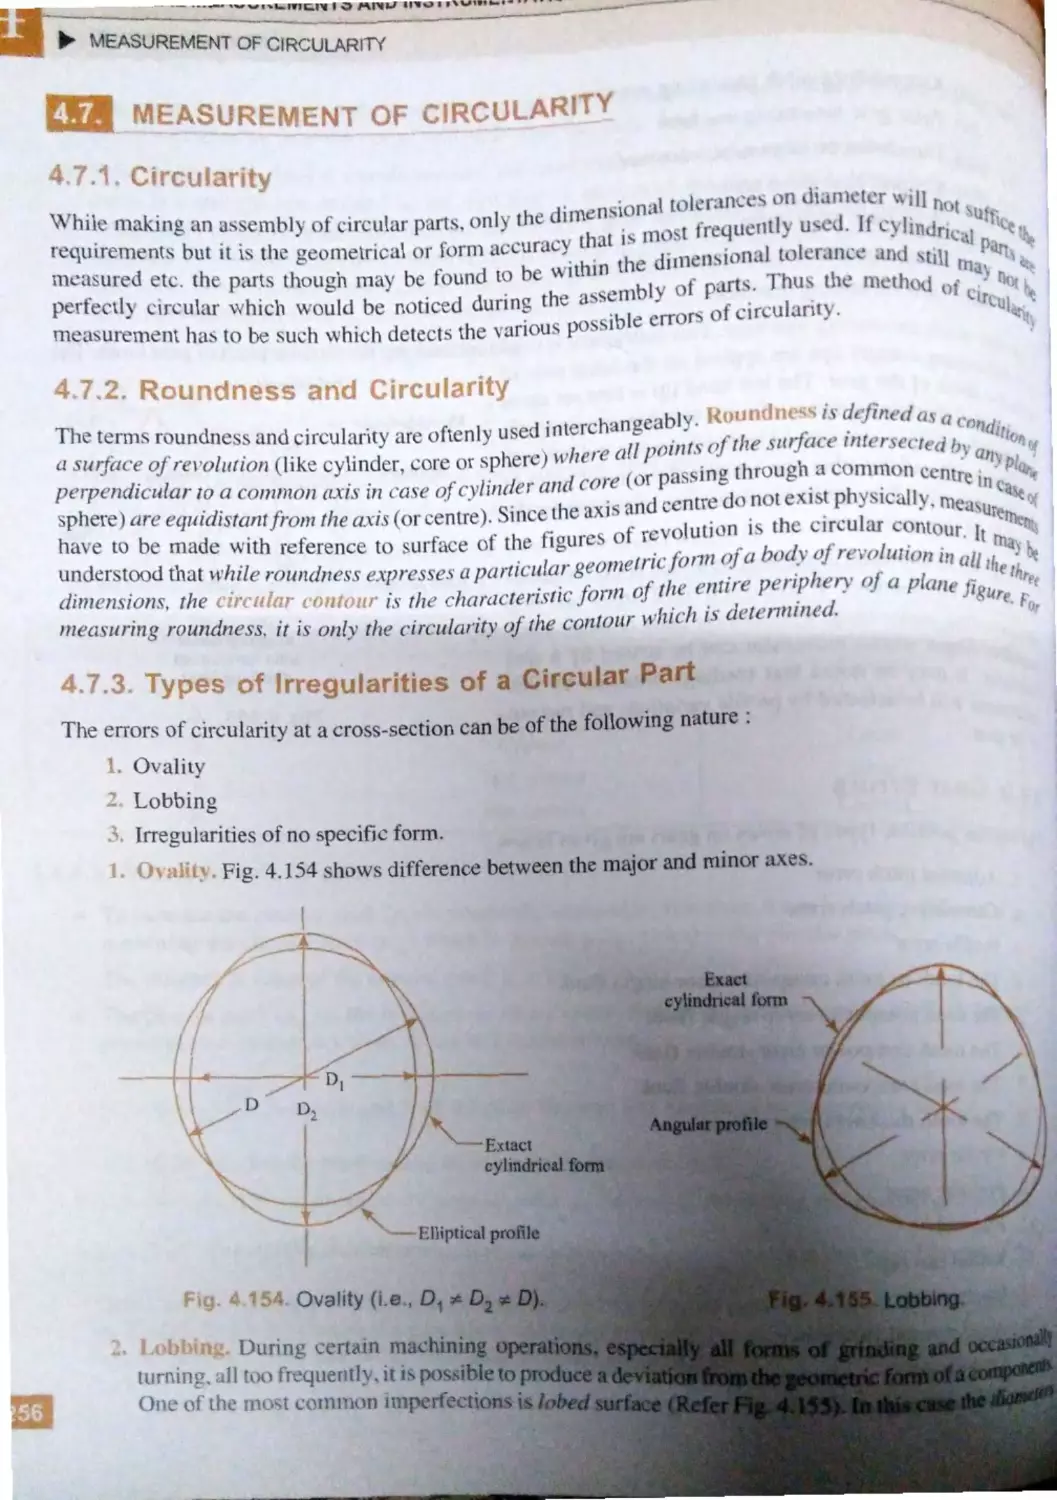 4.7. Measurement of Circularity
4.7.2. Roundness and Circularity
4.7.3. Types of Irregularities of a Circular Part